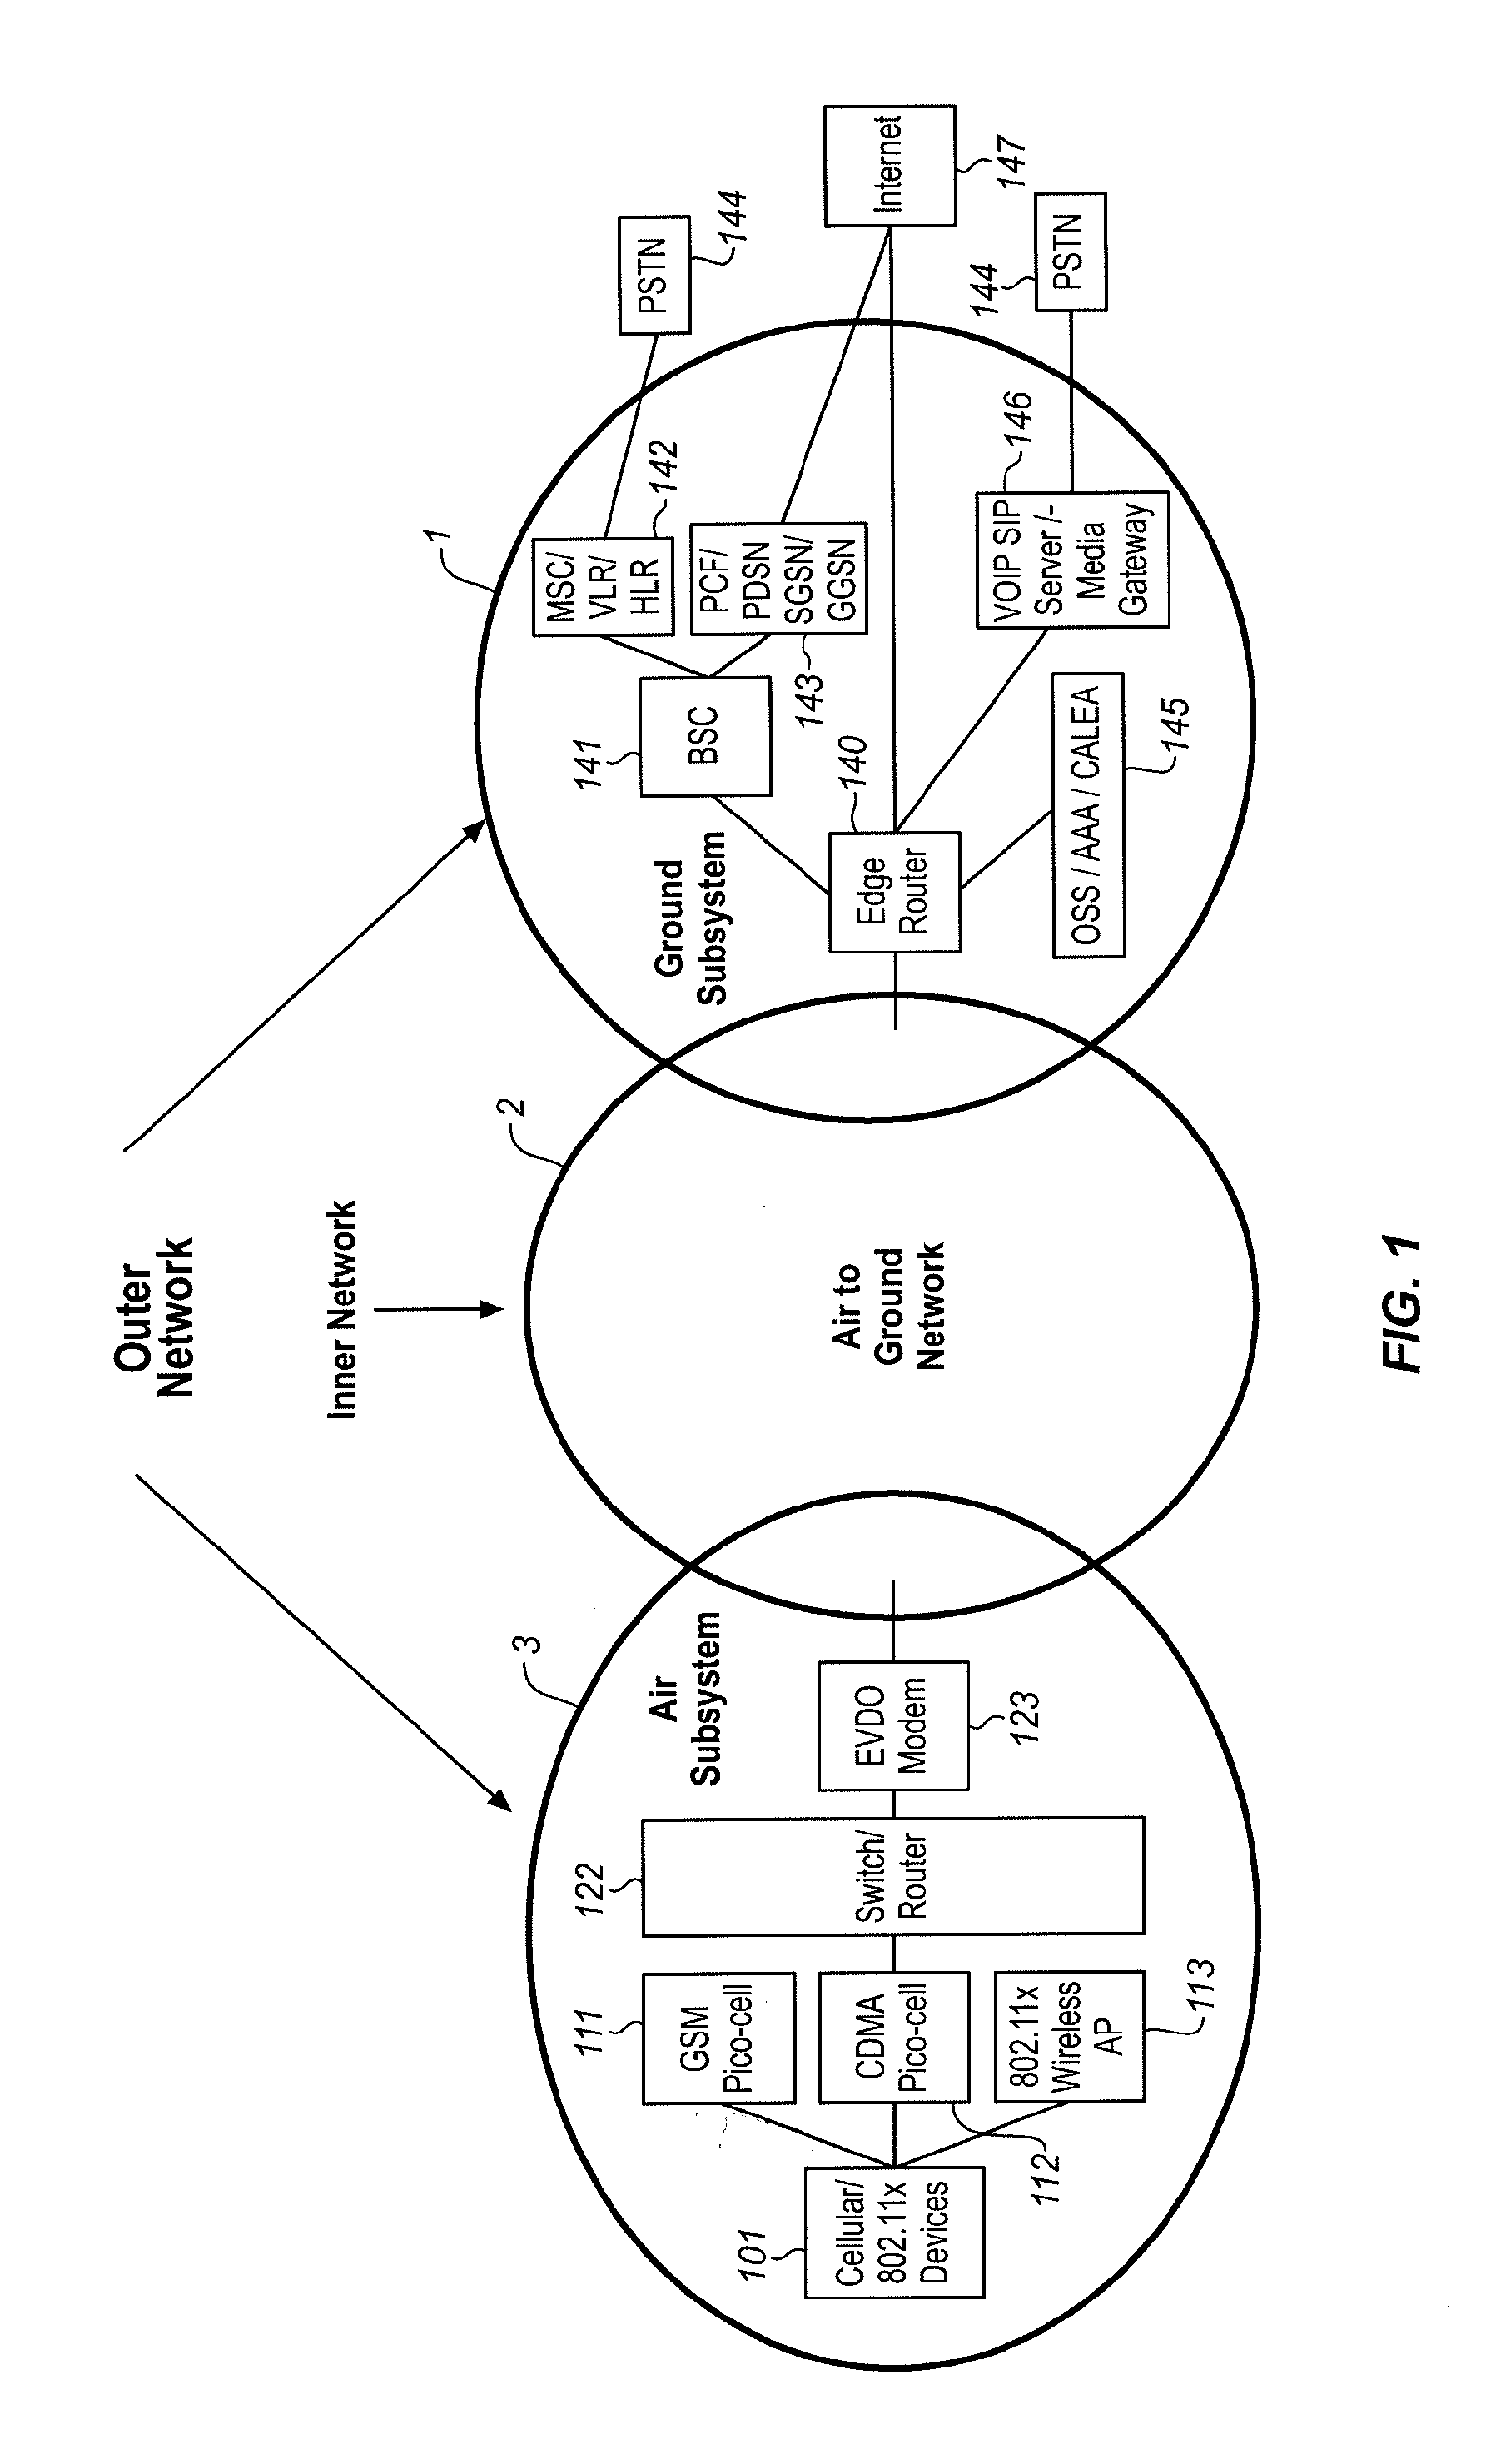 System for customizing electronic services for delivery to a passenger in an airborne wireless cellular network